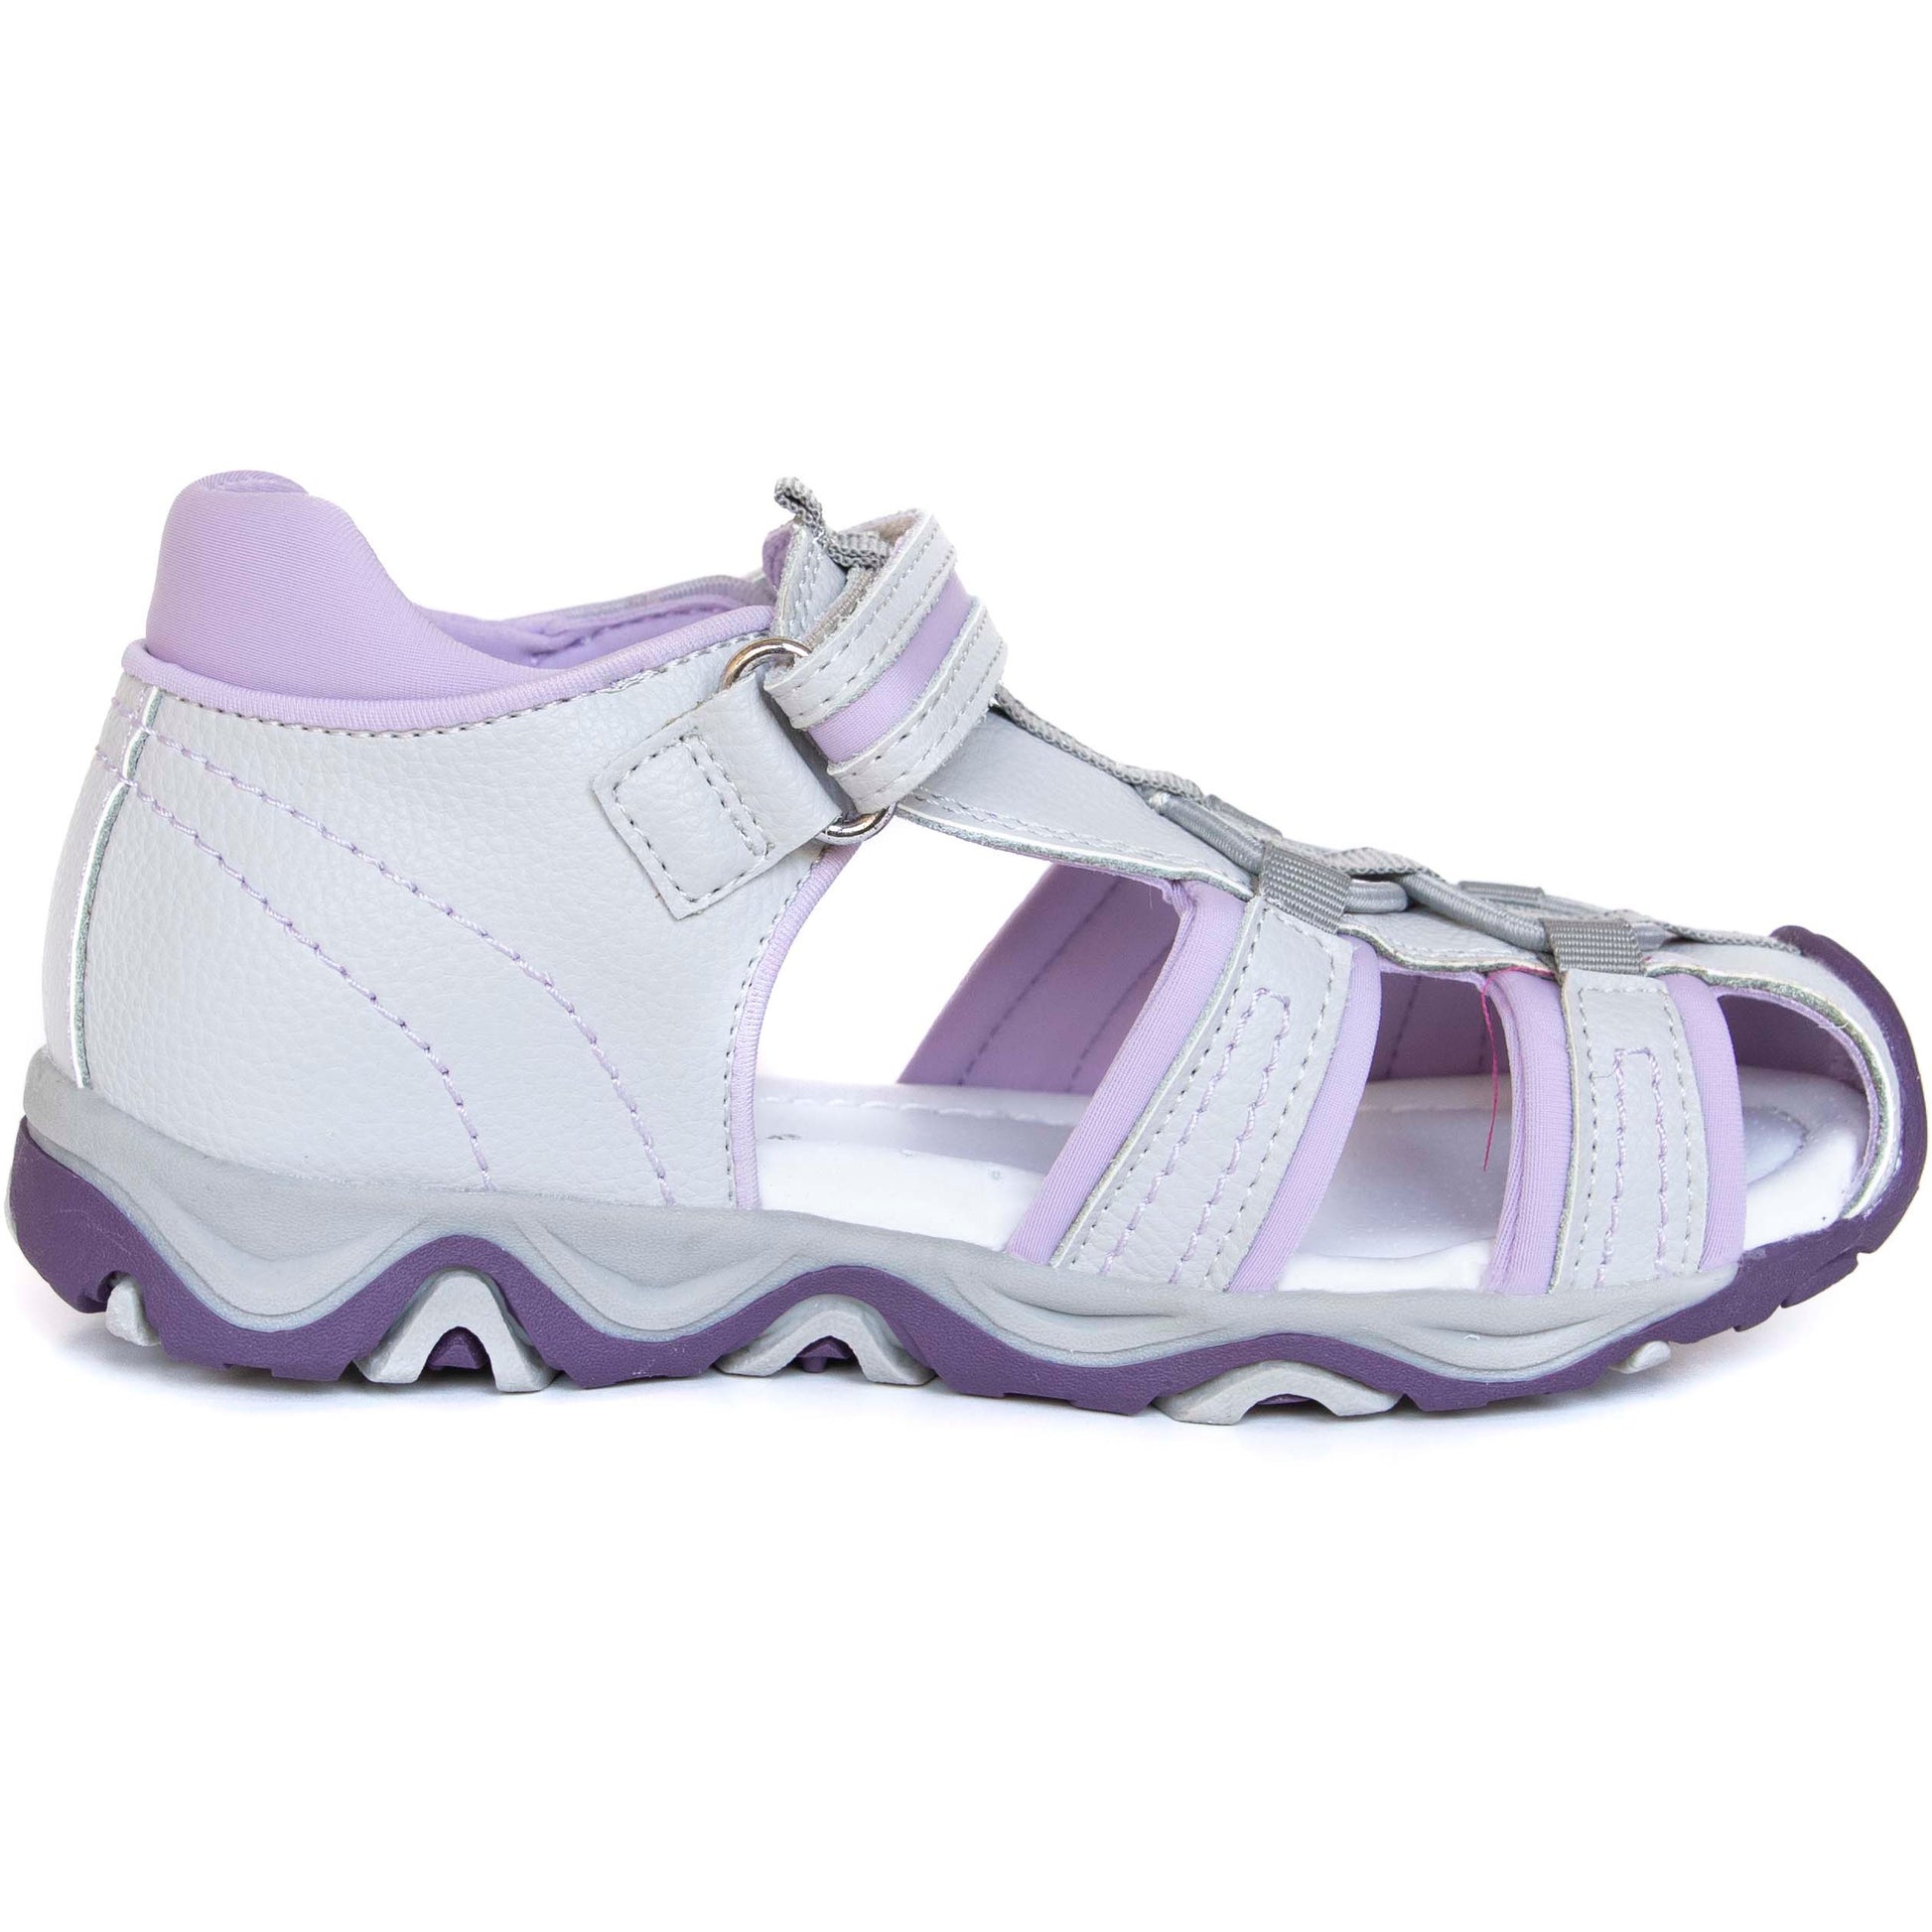 Gentle arch support, cushioned Achilles collar and a solid heel counter are great supportive features of these sportive girls sandals.